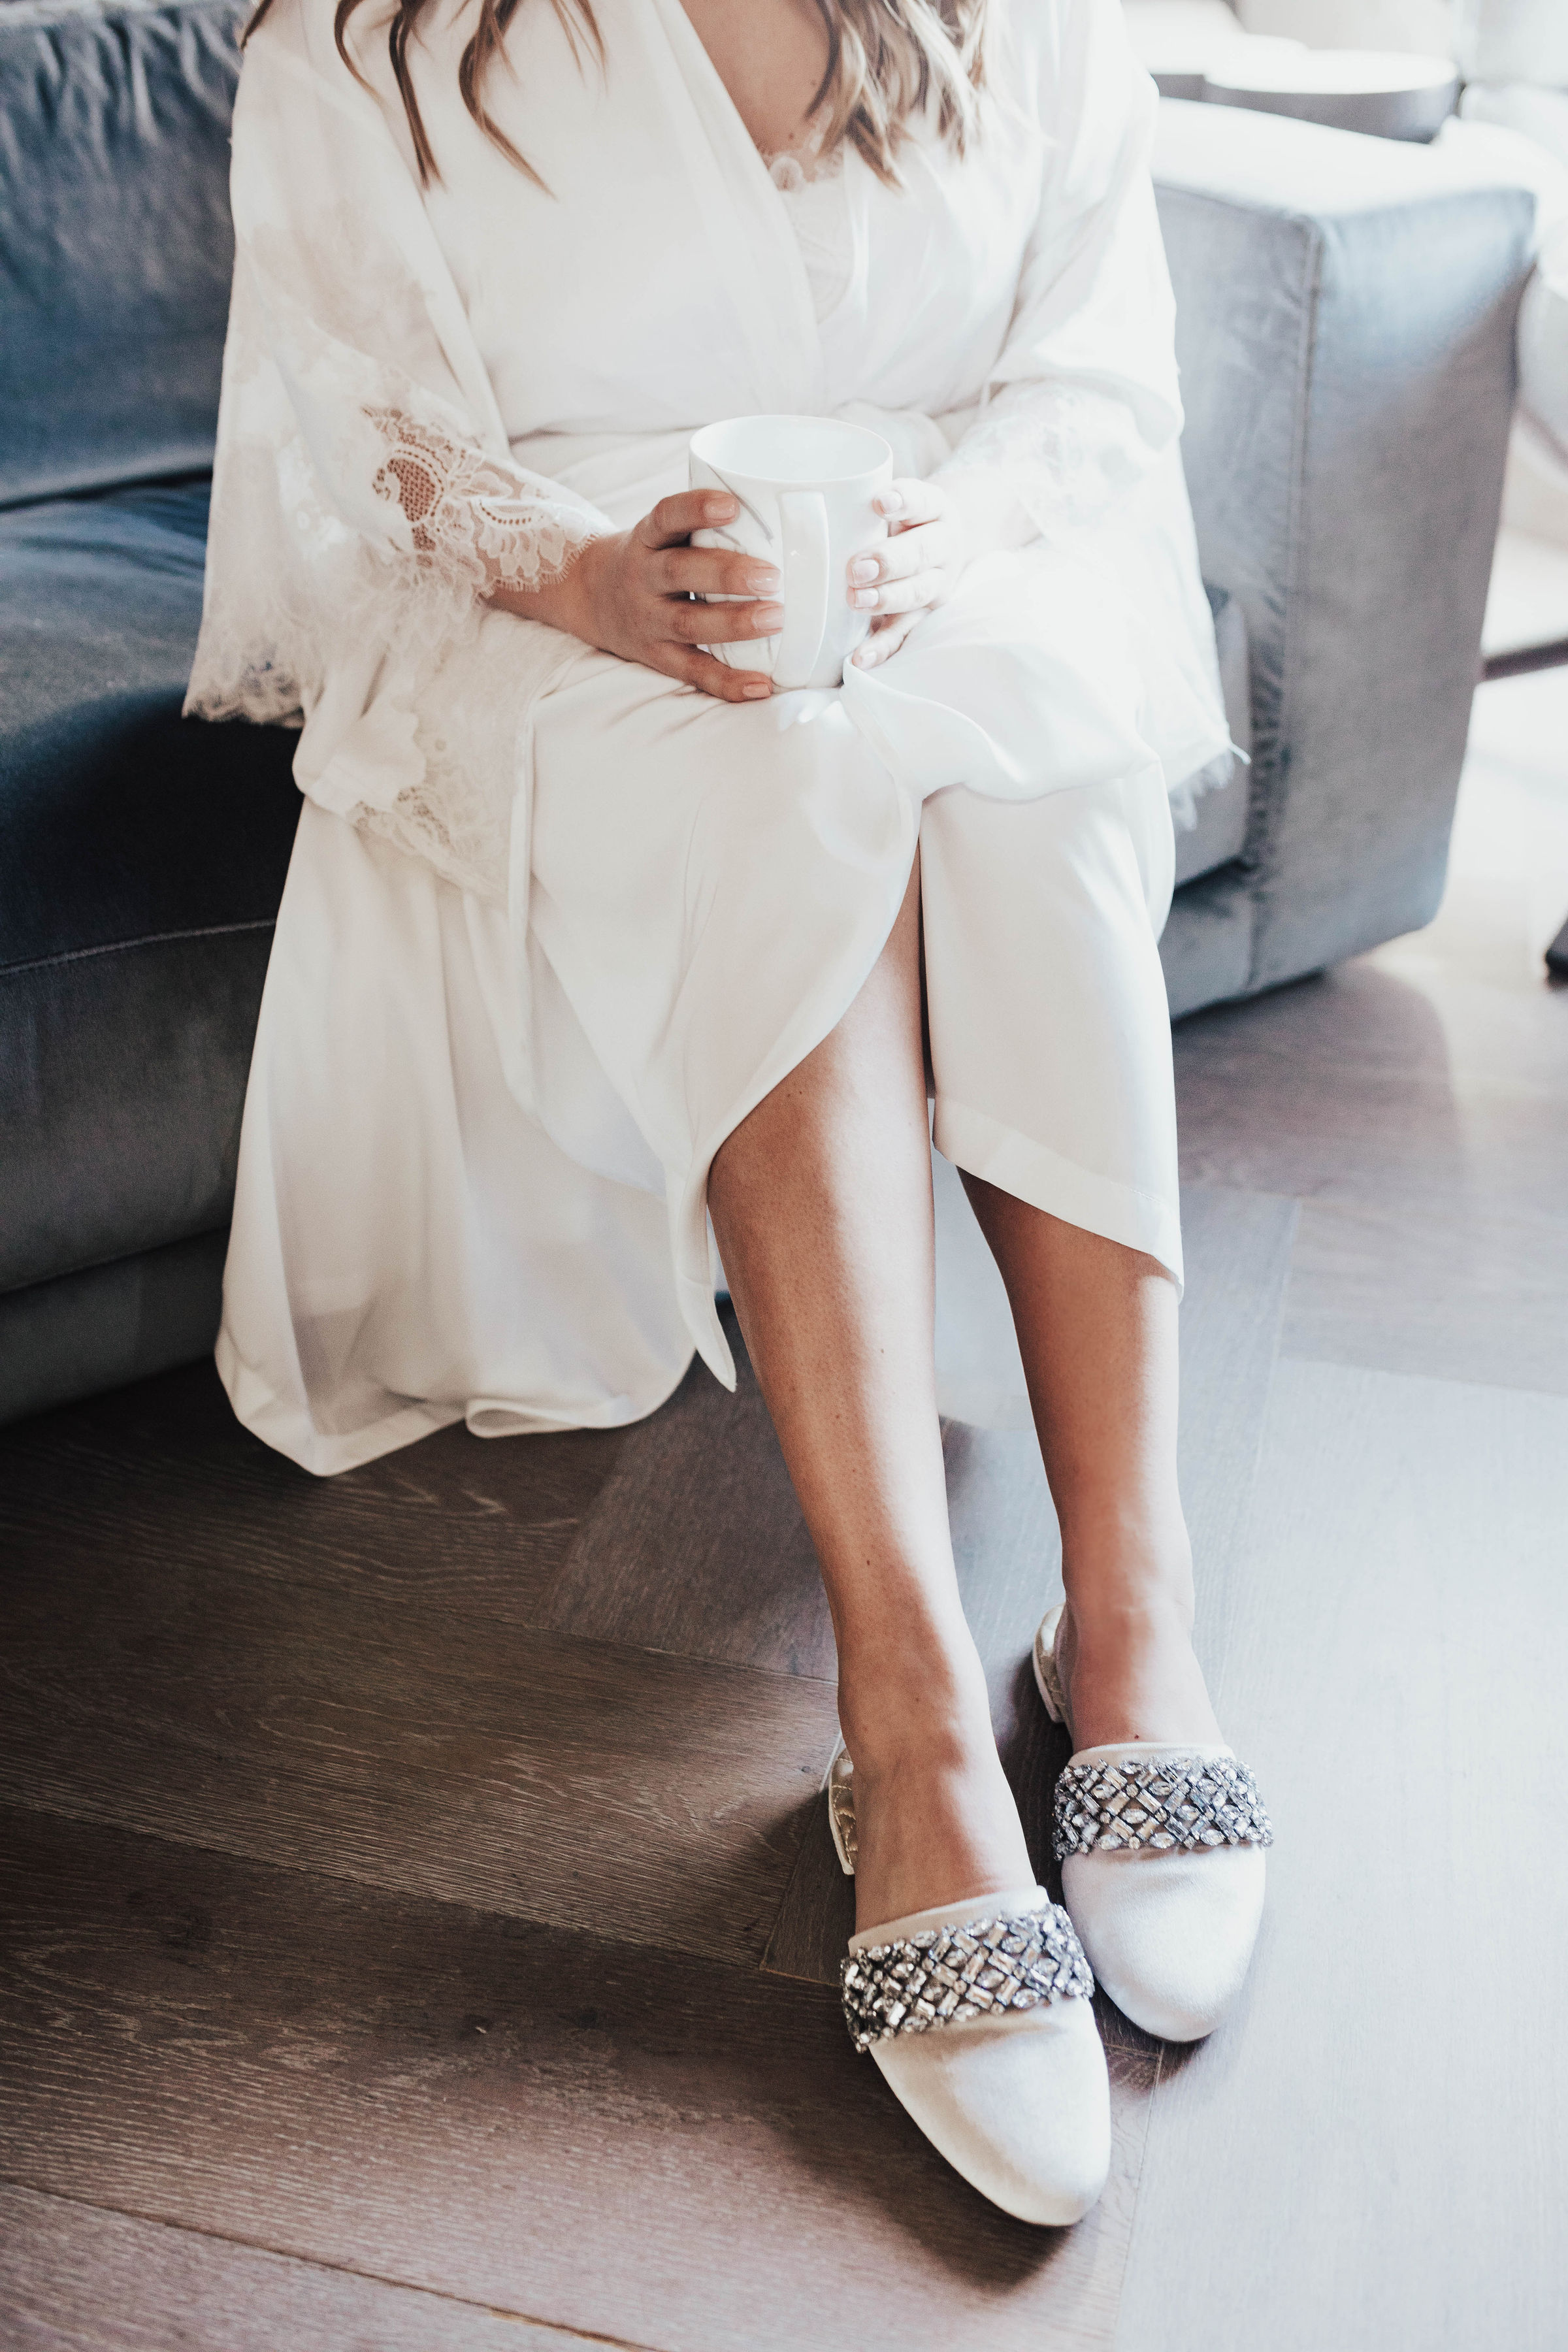 San Francisco blogger, Ashley Zeal, from Two Peas in a Prada shares Birdies for brides - the slipper she wore to get ready on her wedding day. Birdies also makes the perfect bridesmaid gift.